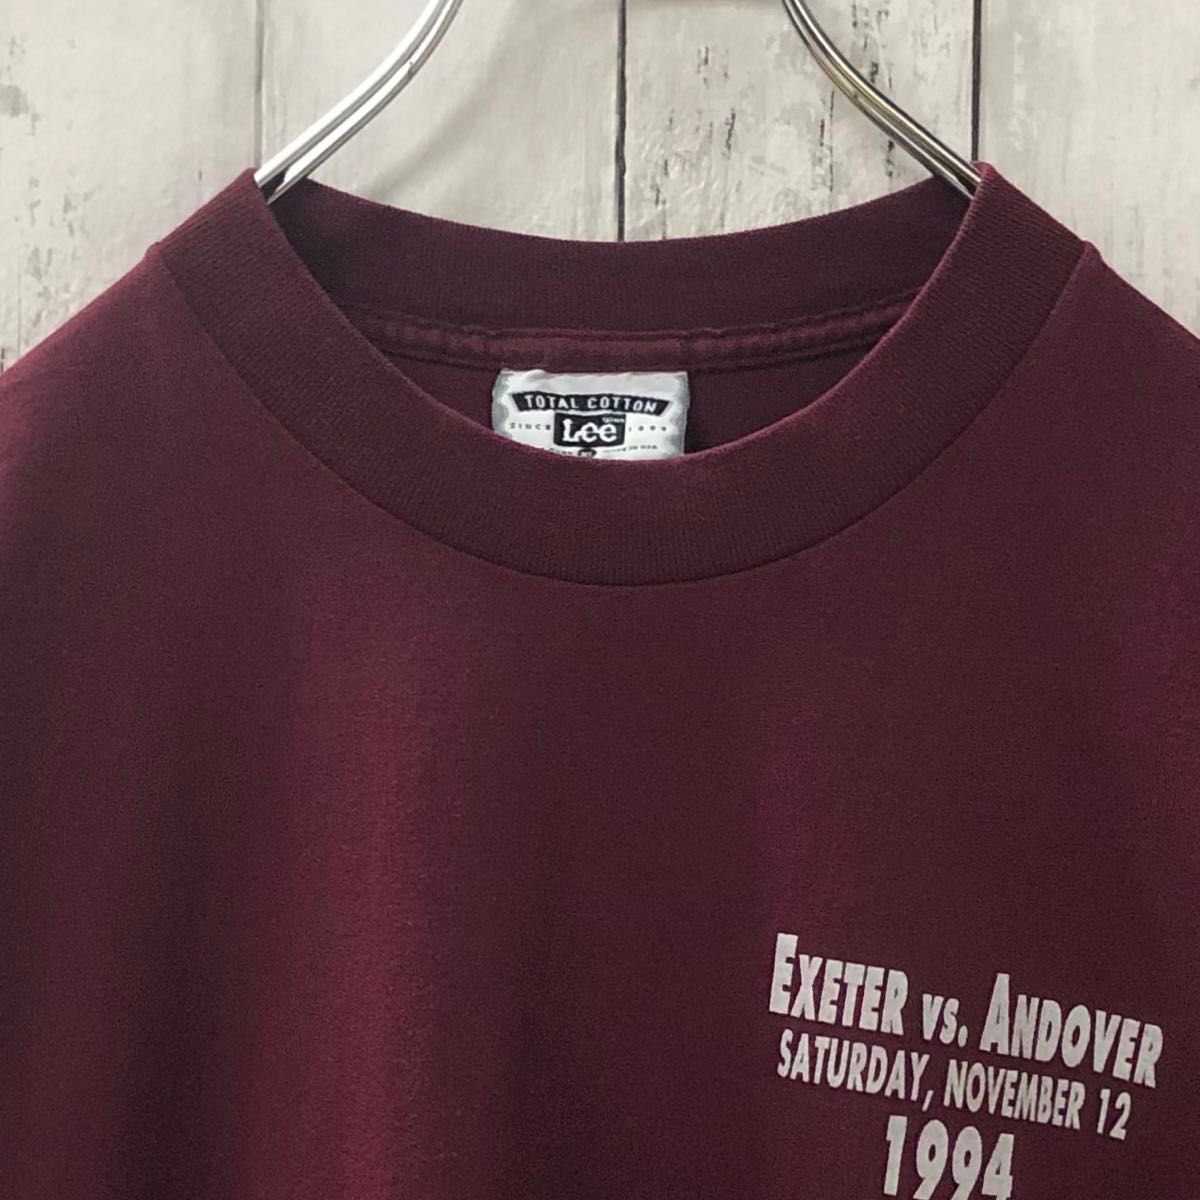 90s Lee リー USA製 アメリカ古着 チーム系 両面プリント 半袖Tシャツ XL